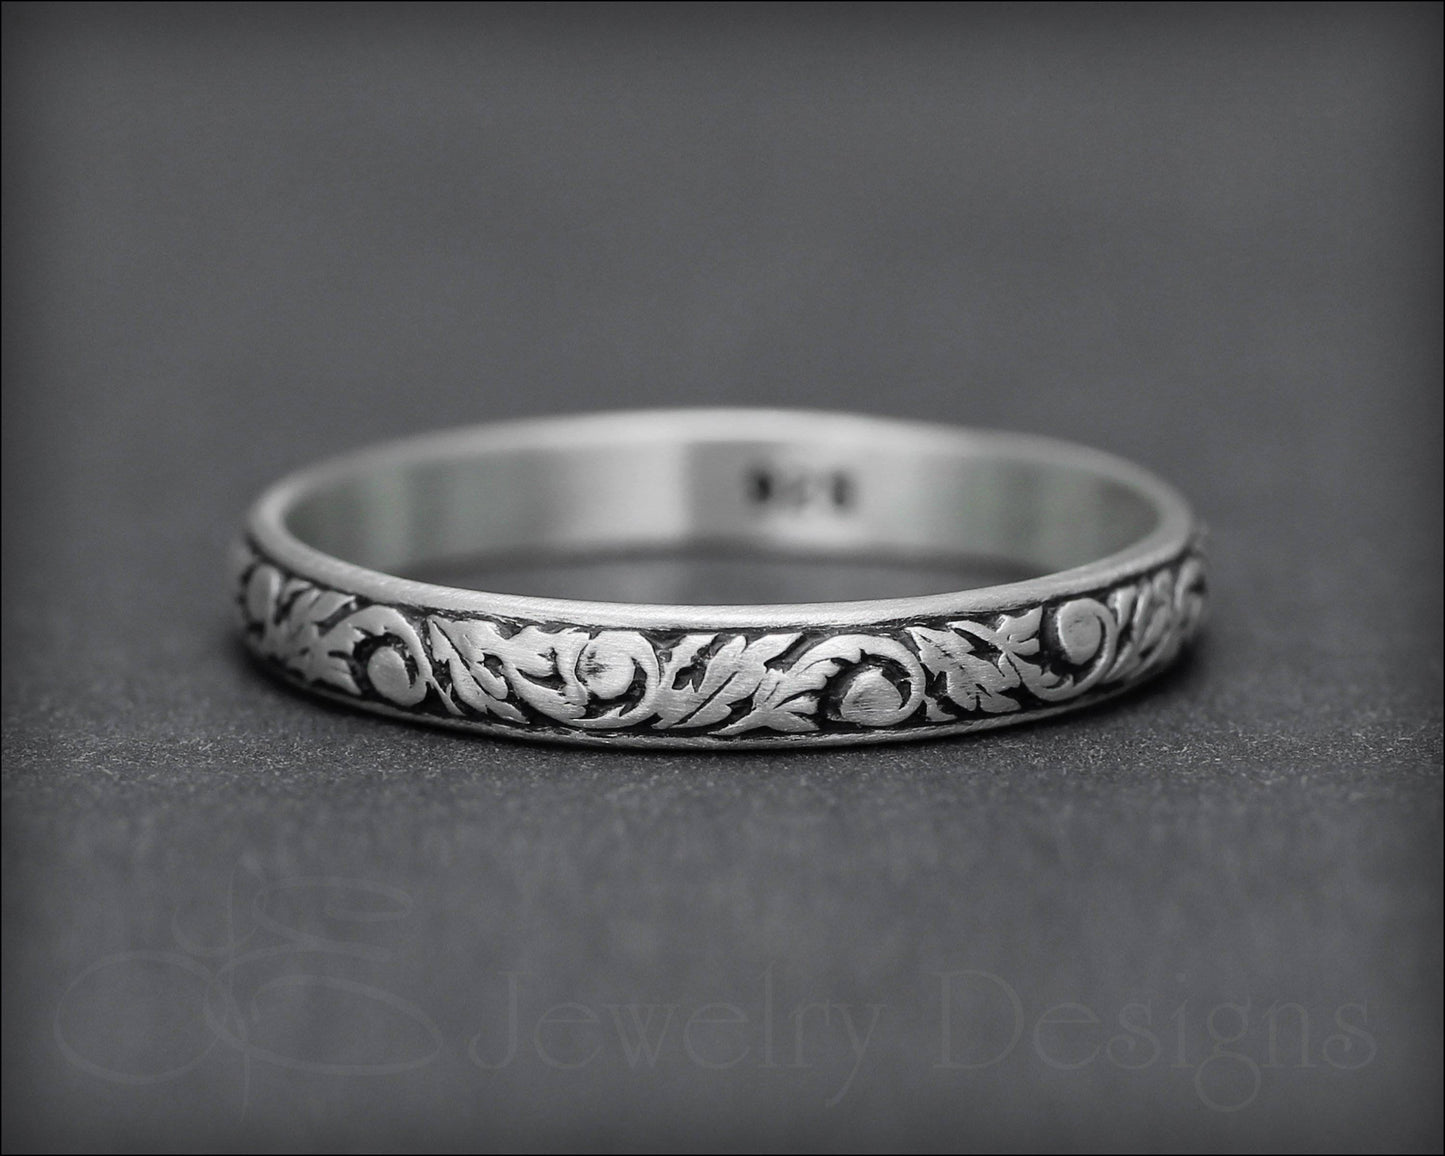 Load image into Gallery viewer, Skinny Sterling Floral Band - LE Jewelry Designs
